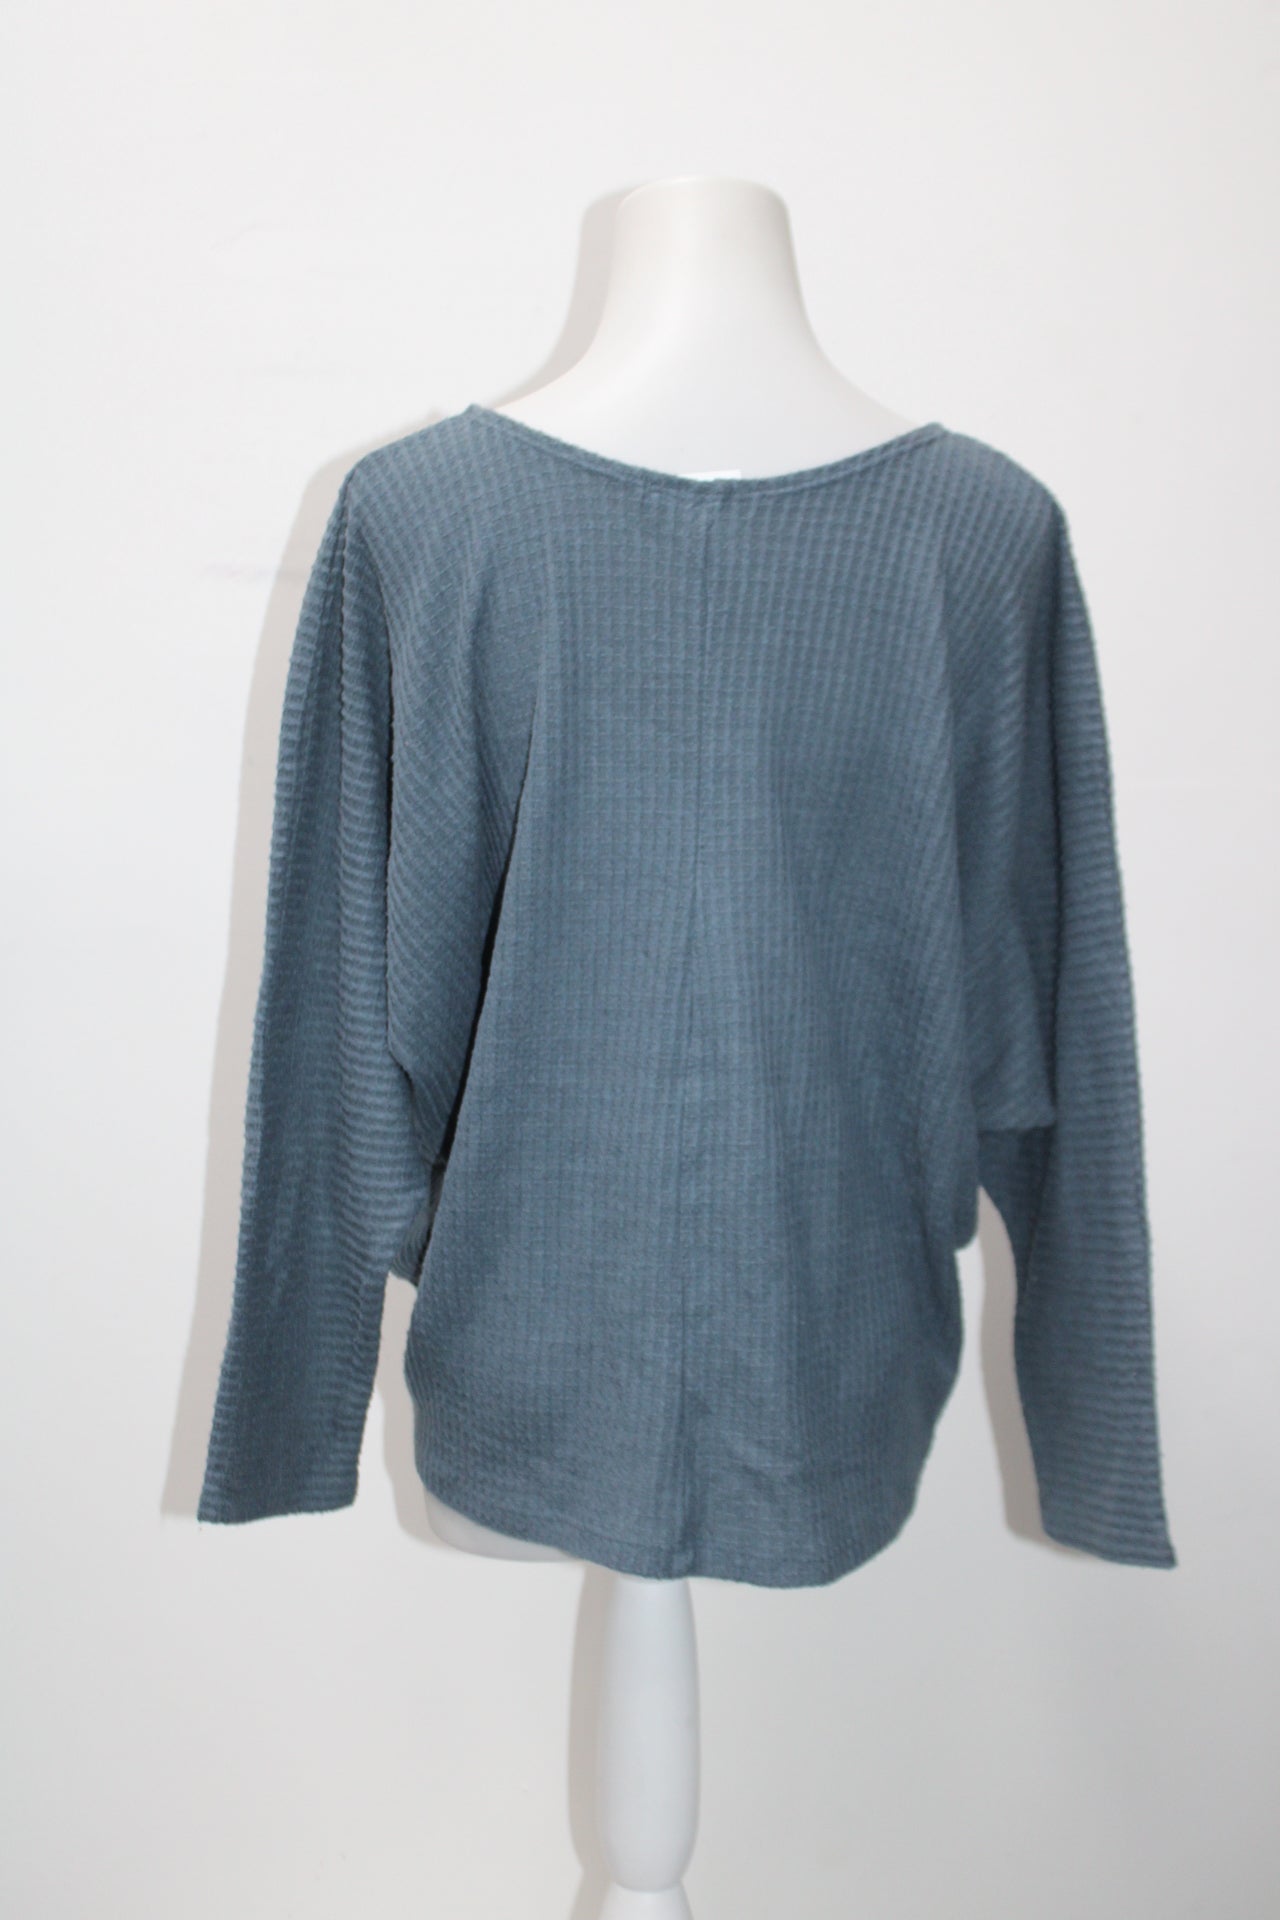 Kim & Cami Women's Top Blue M Pre-Owned